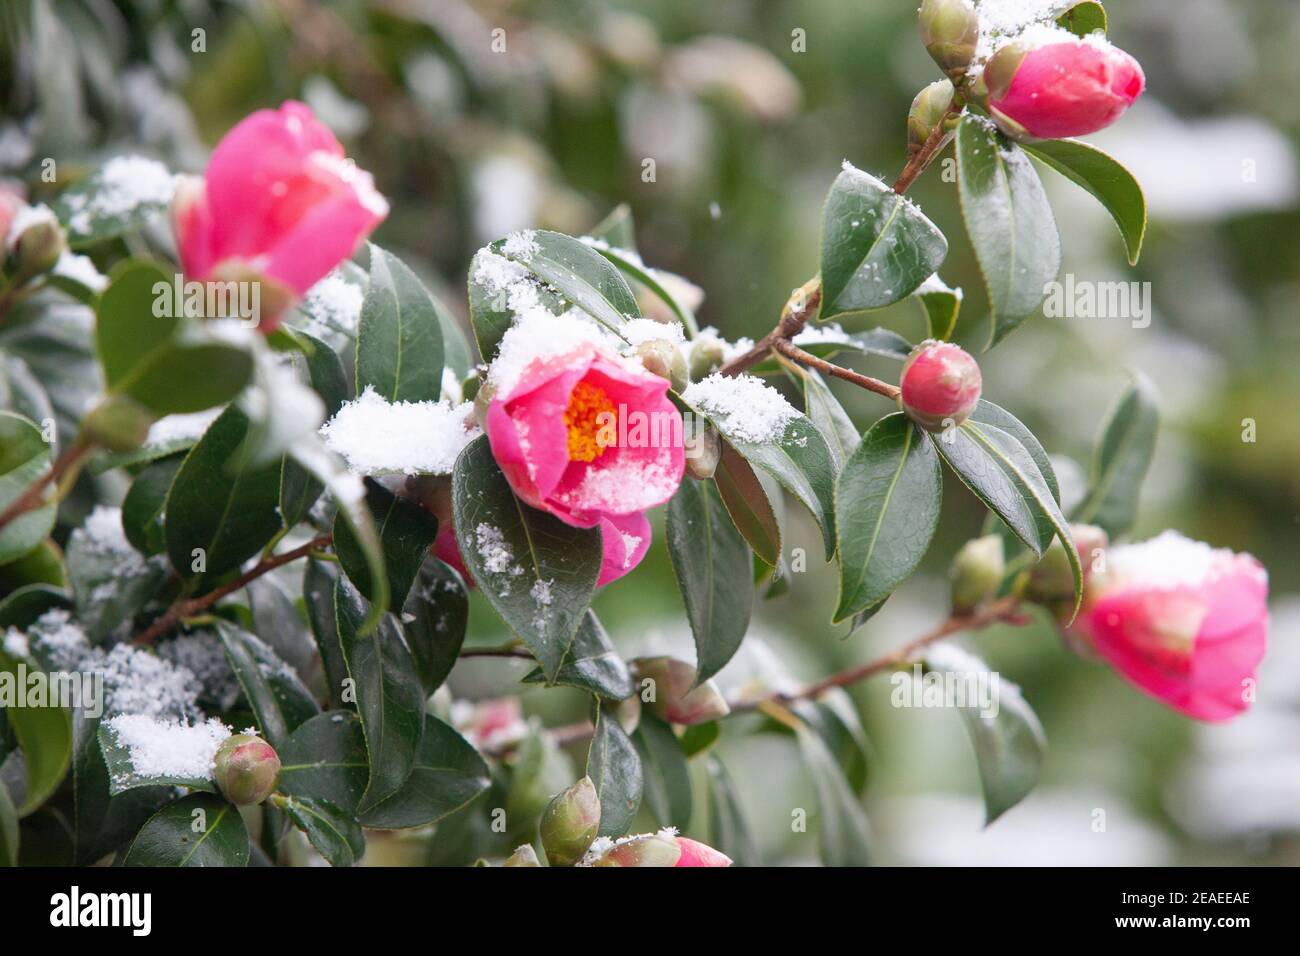 London, UK. 9 February 2021: After three days of snow in London it is starting to settle and winds have dropped as Storm Darcy has passed. A pink camelia flower is dusted with snow. Anna Watson/Alamy Live News Stock Photo